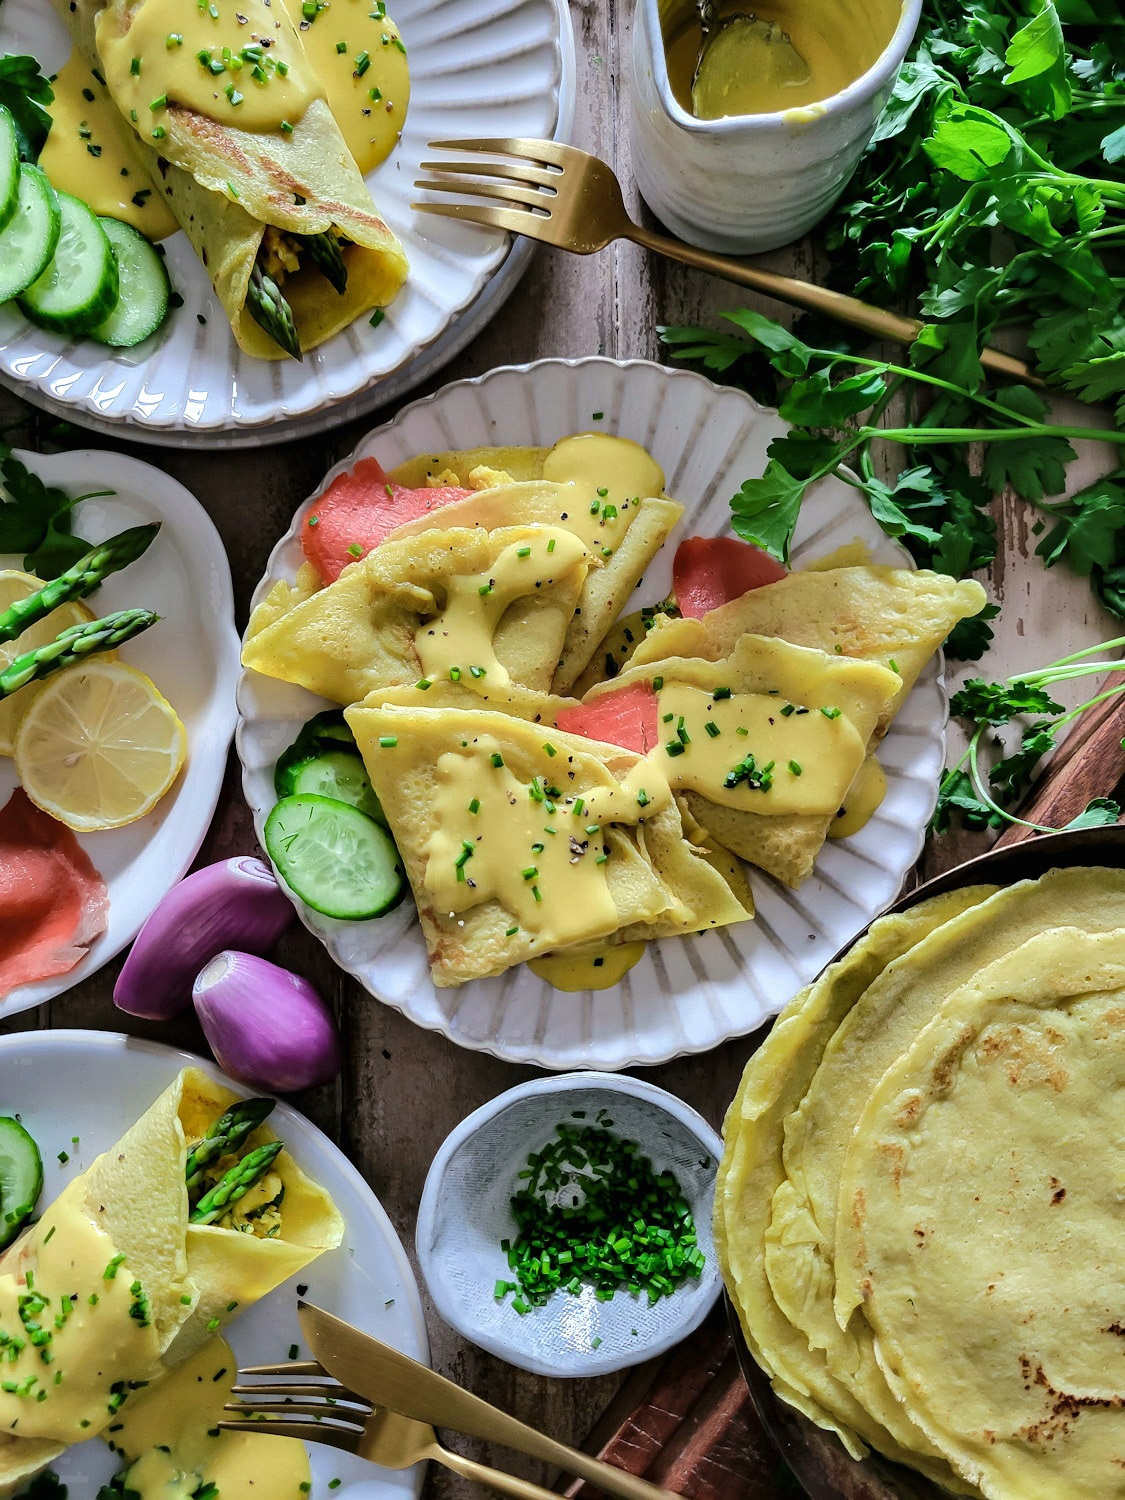 Plates of folded savory breakfast crepes, filled with asparagus, smoked salmon, creamy herbed scrambled eggs, hollandaise sauce, garnished with cucumbers and chives.